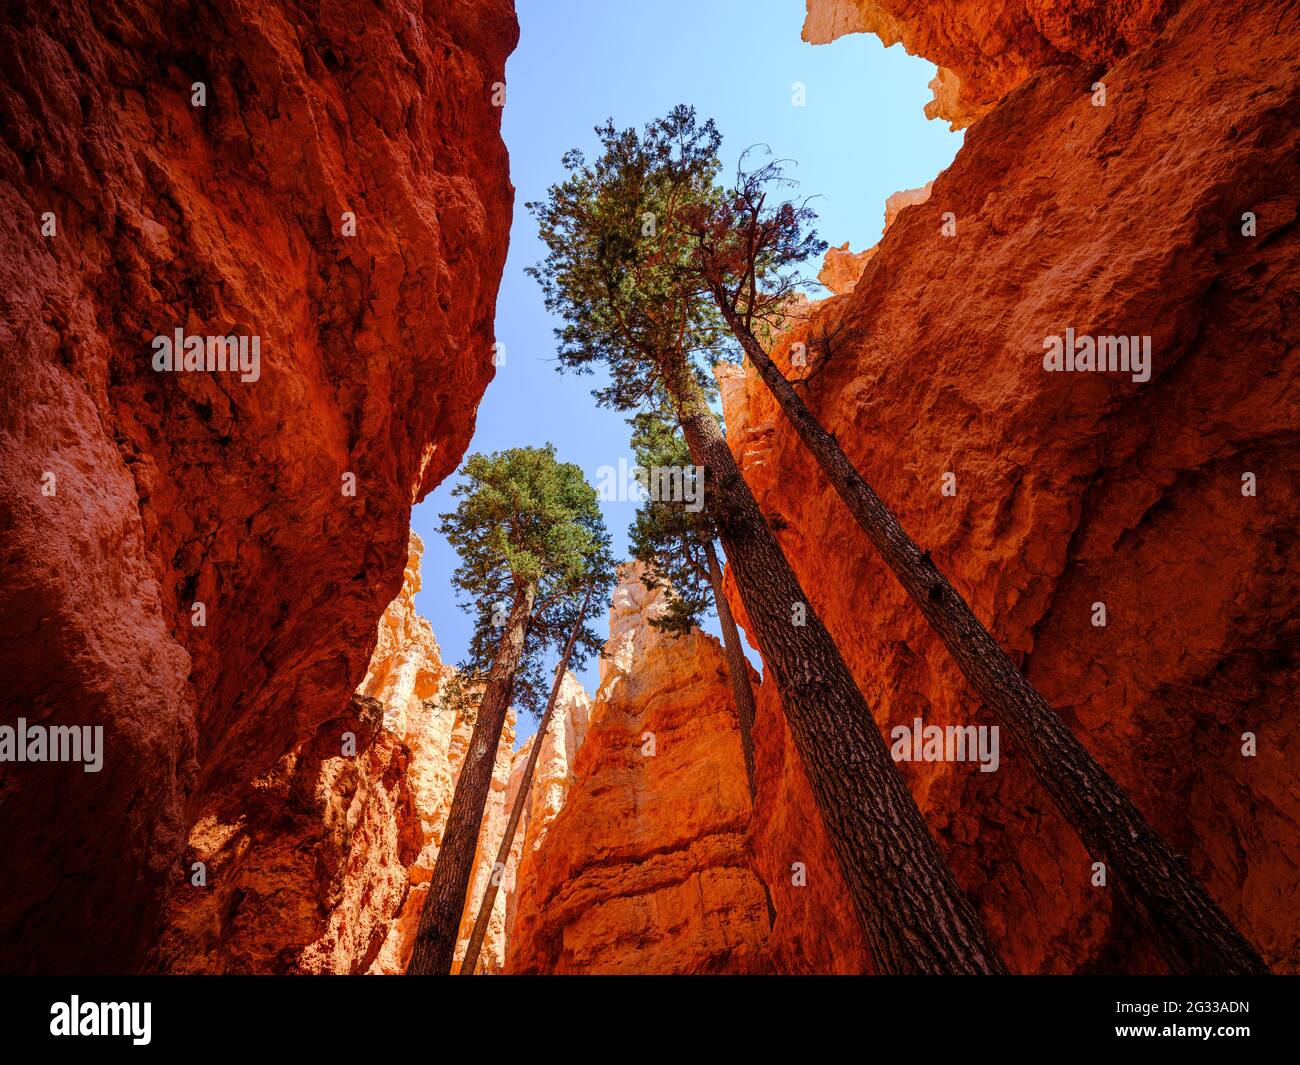 BRYCE, UTAH - CIRCA AUGUST 2020: Slot Canyon in Wall Street, a section of the Navajo Loop Trail in Bryce Canyon National Park, Utah. Stock Photo